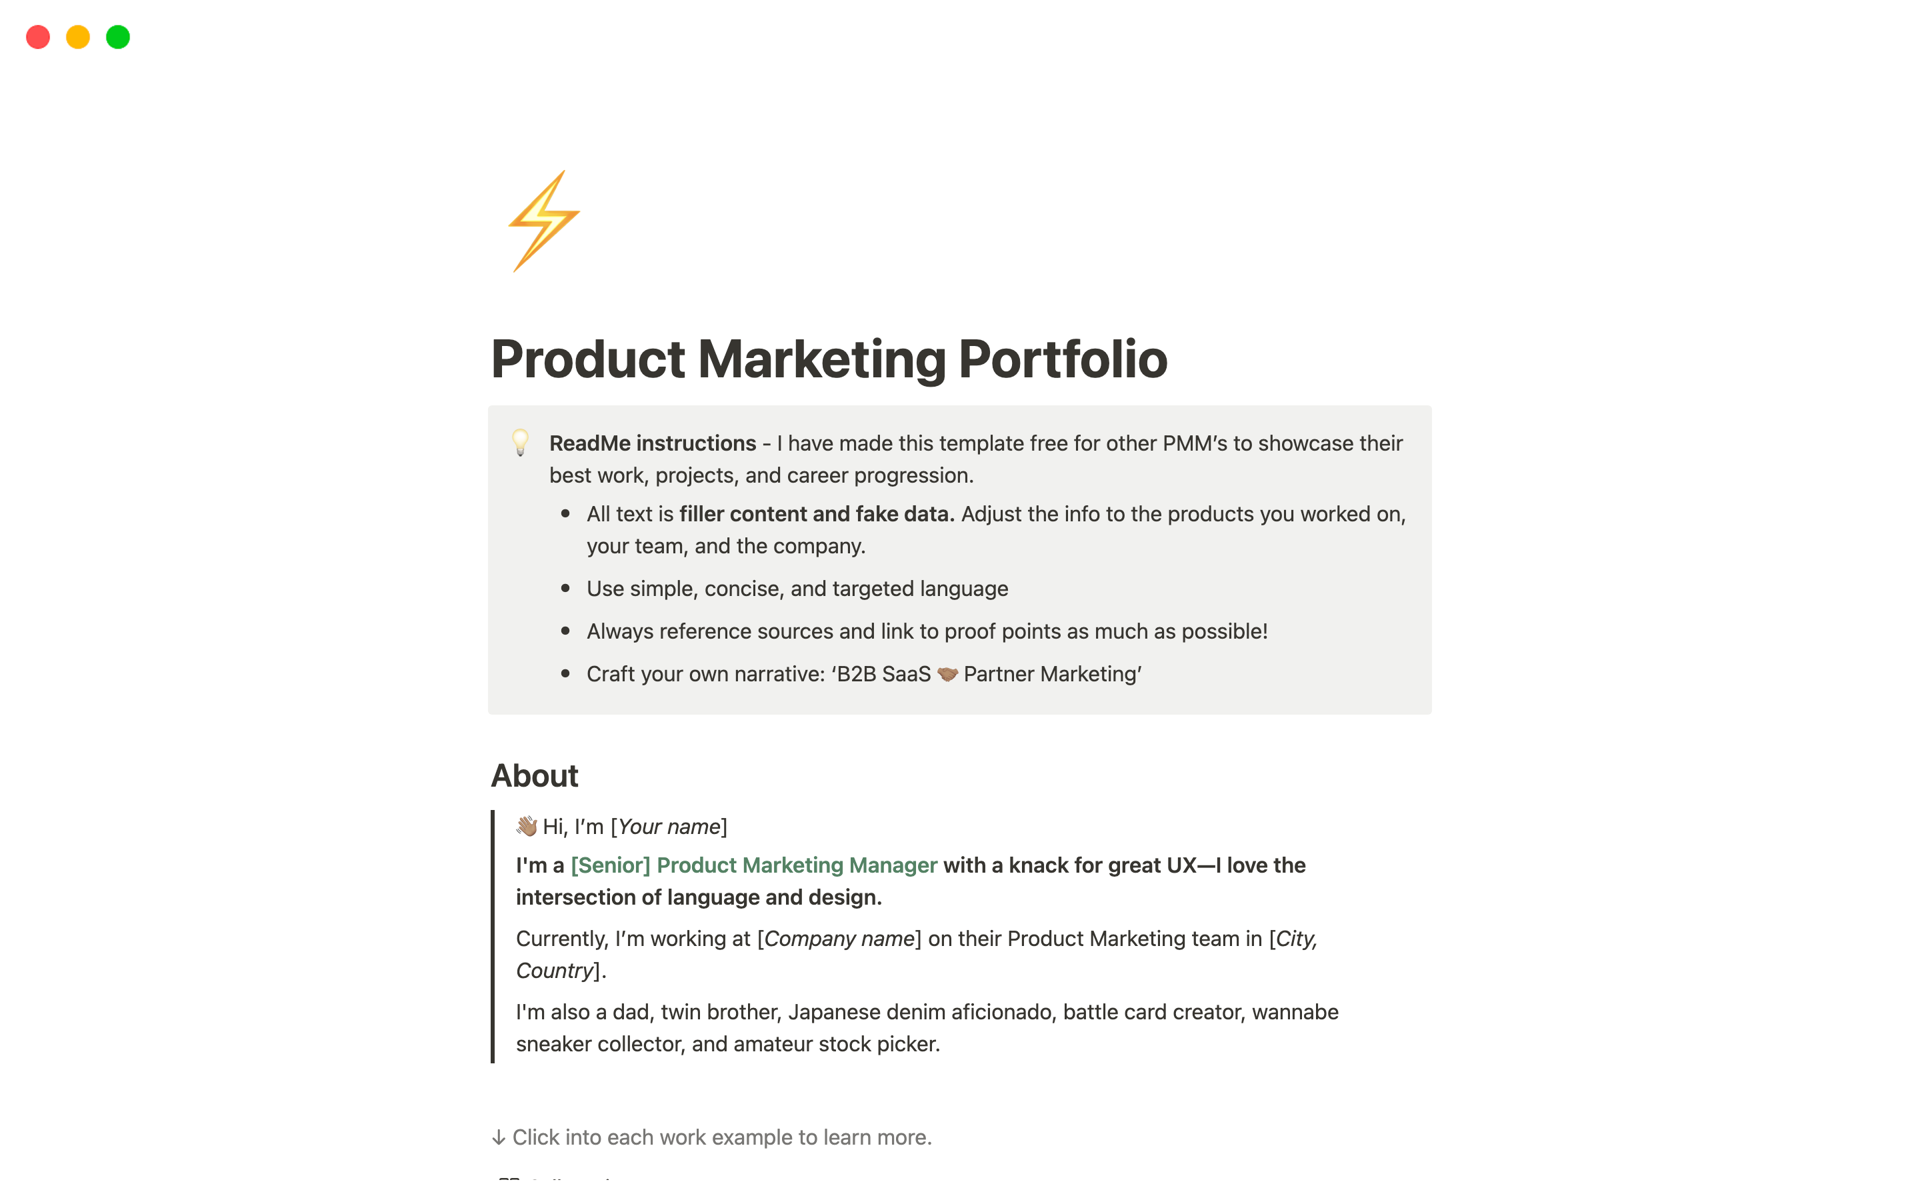 Build your very own product marketing portfolio in Notion